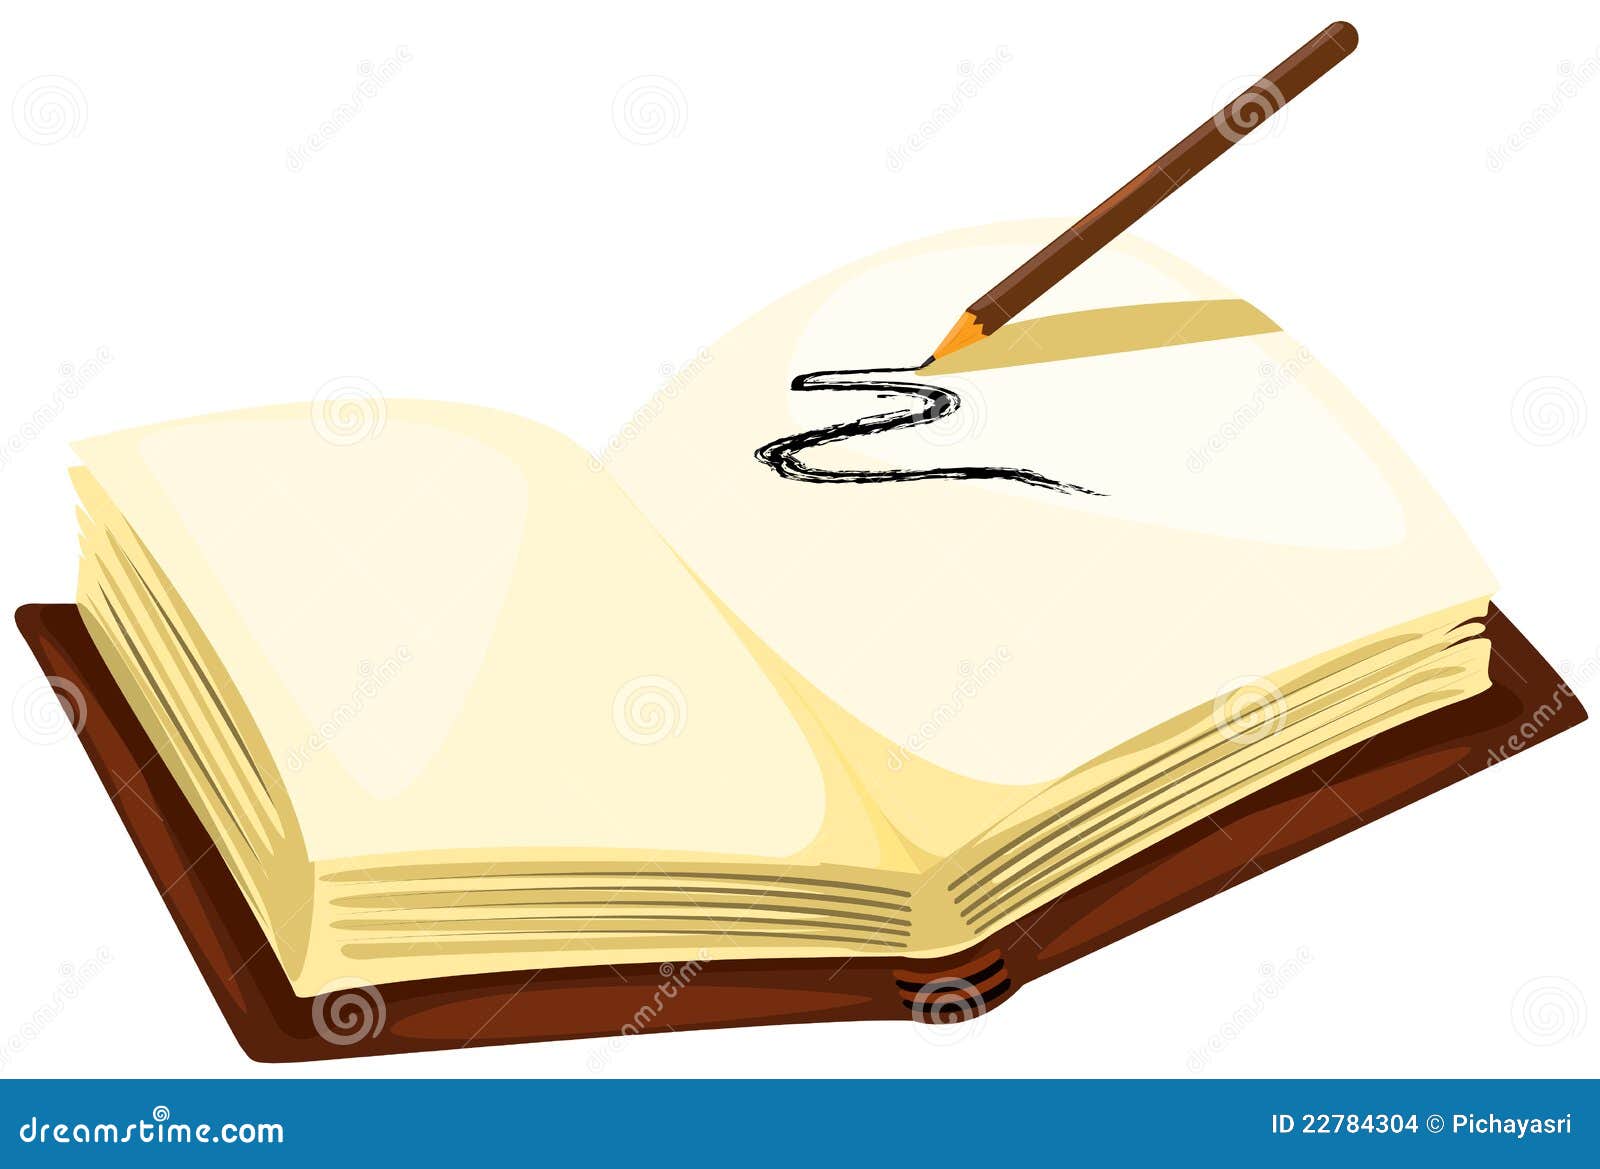 Drawing Pencil With Empty Book Stock Vector Illustration of drawing